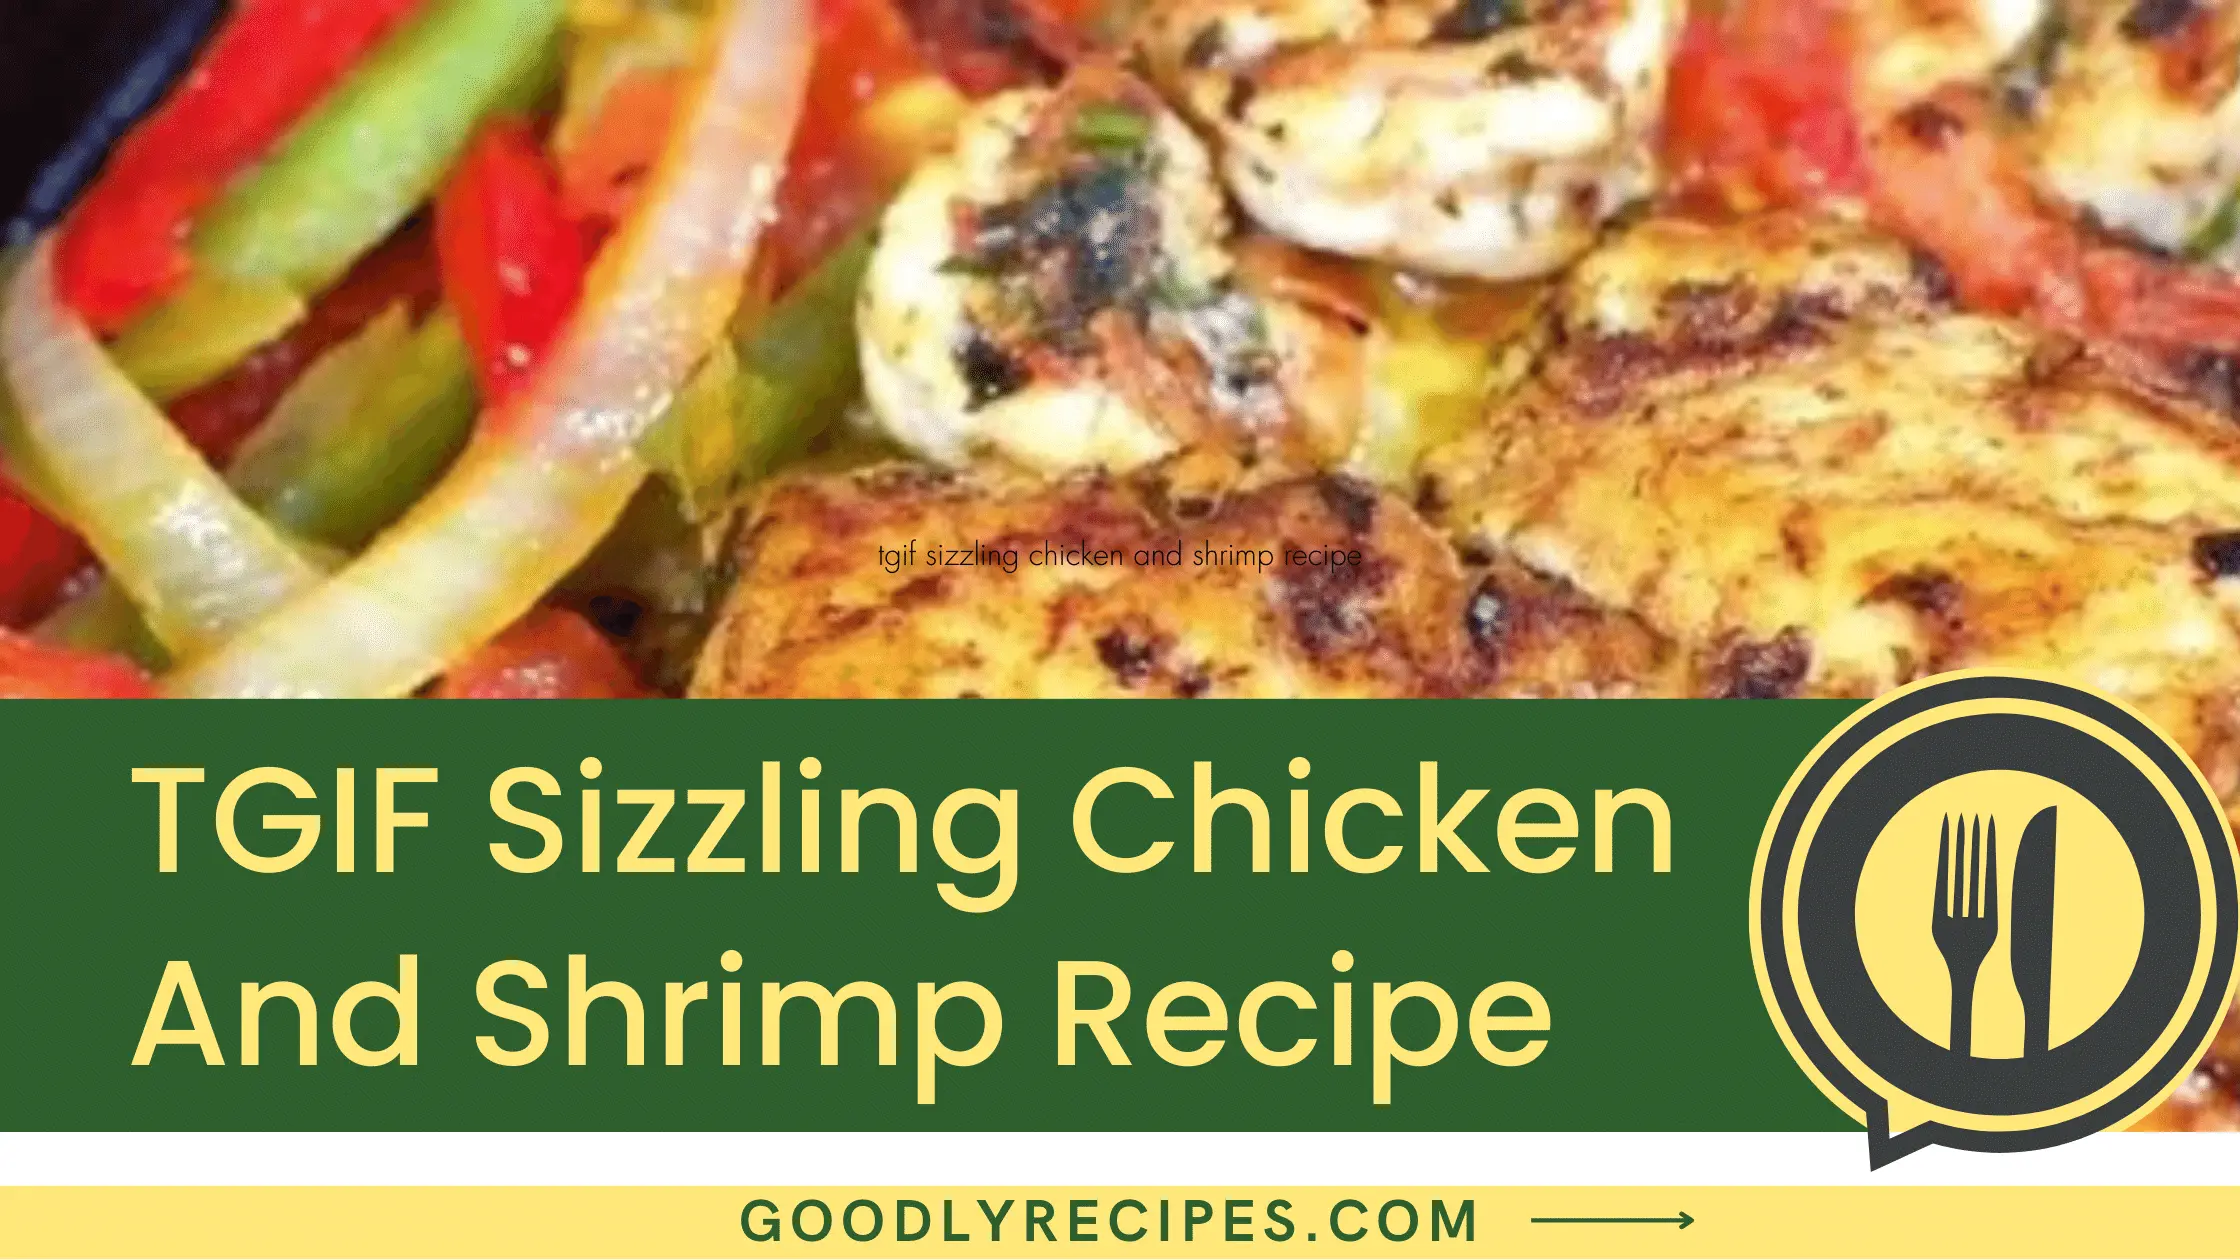 What Is Tgif Sizzling Chicken And Shrimp?